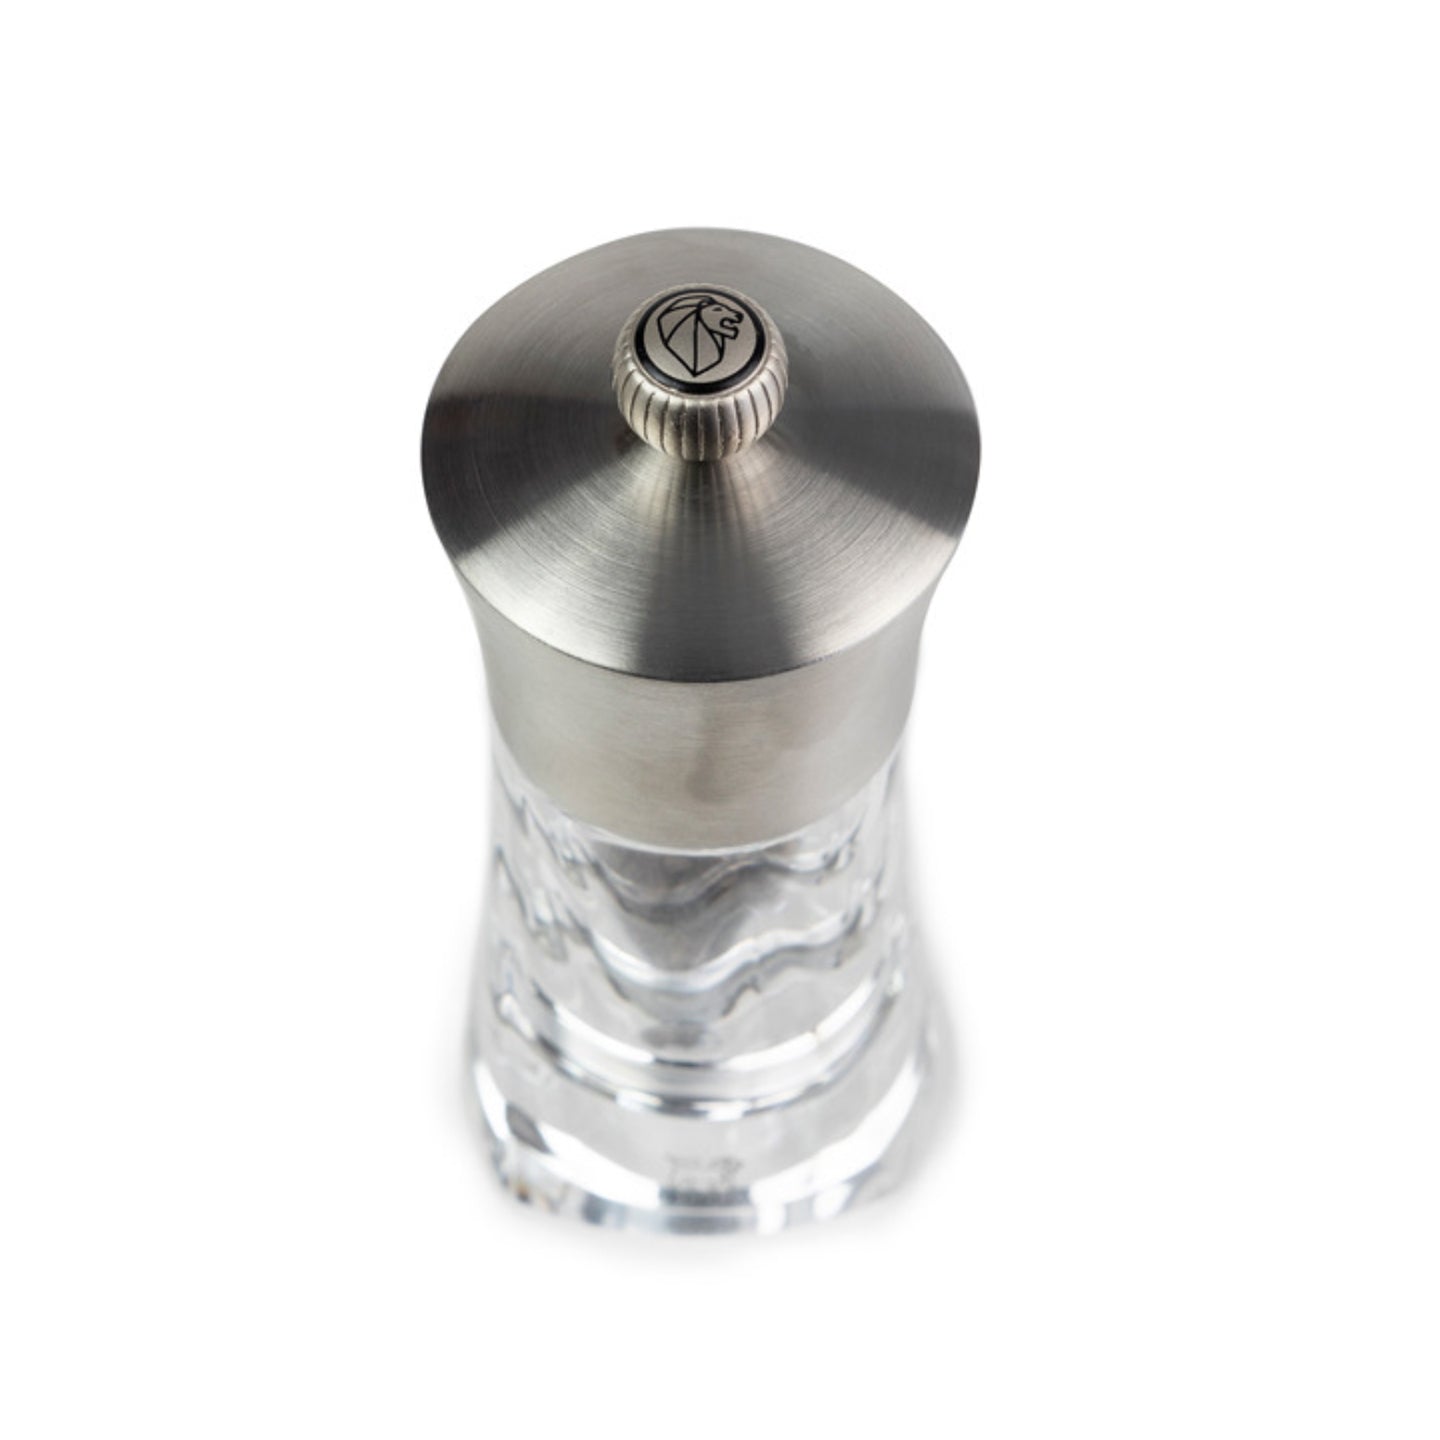 Peugeot Ouessant Stainless Steel Acrylic Pepper Mill / 14cm